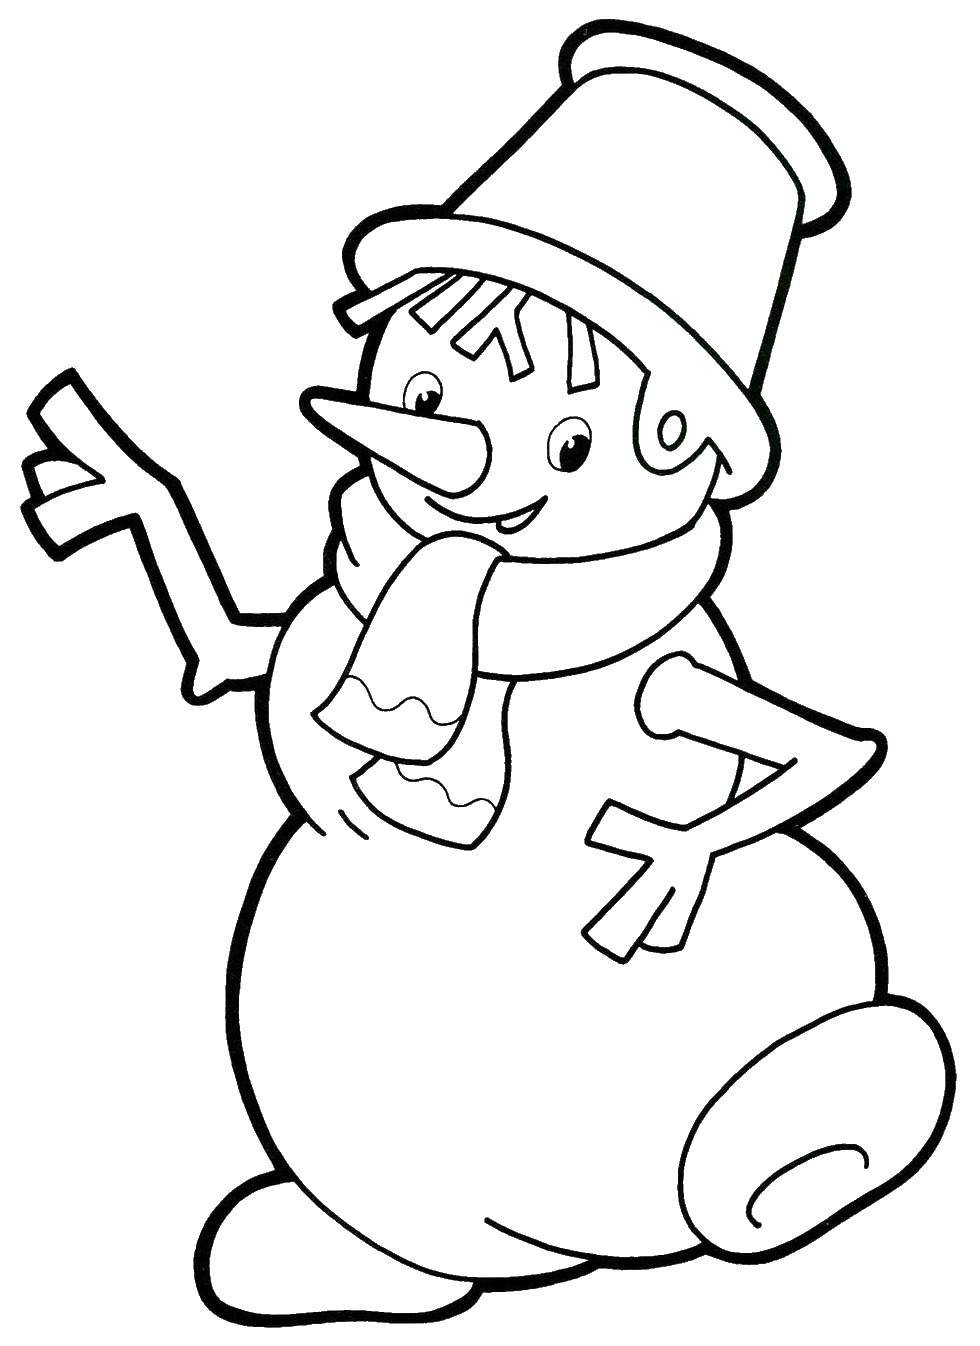 Coloring Snowman. Category Coloring pages for kids. Tags:  snowman bucket, scarf.